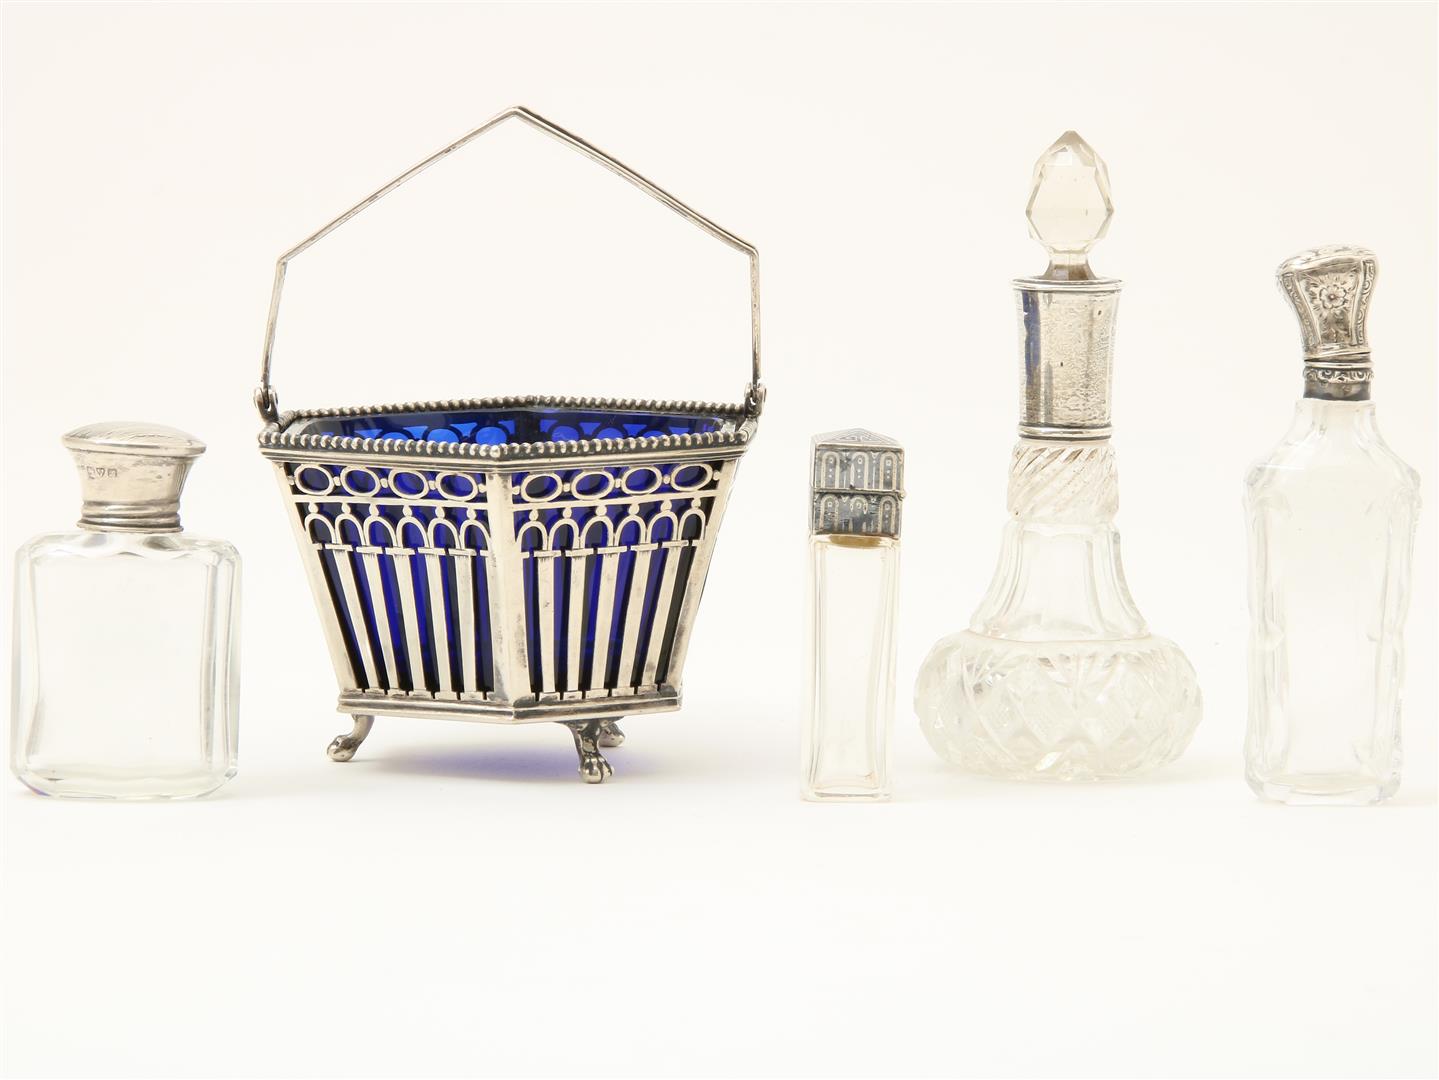 Lot of silverware consisting of silver openwork handle basket with blue glass inner container, jl.